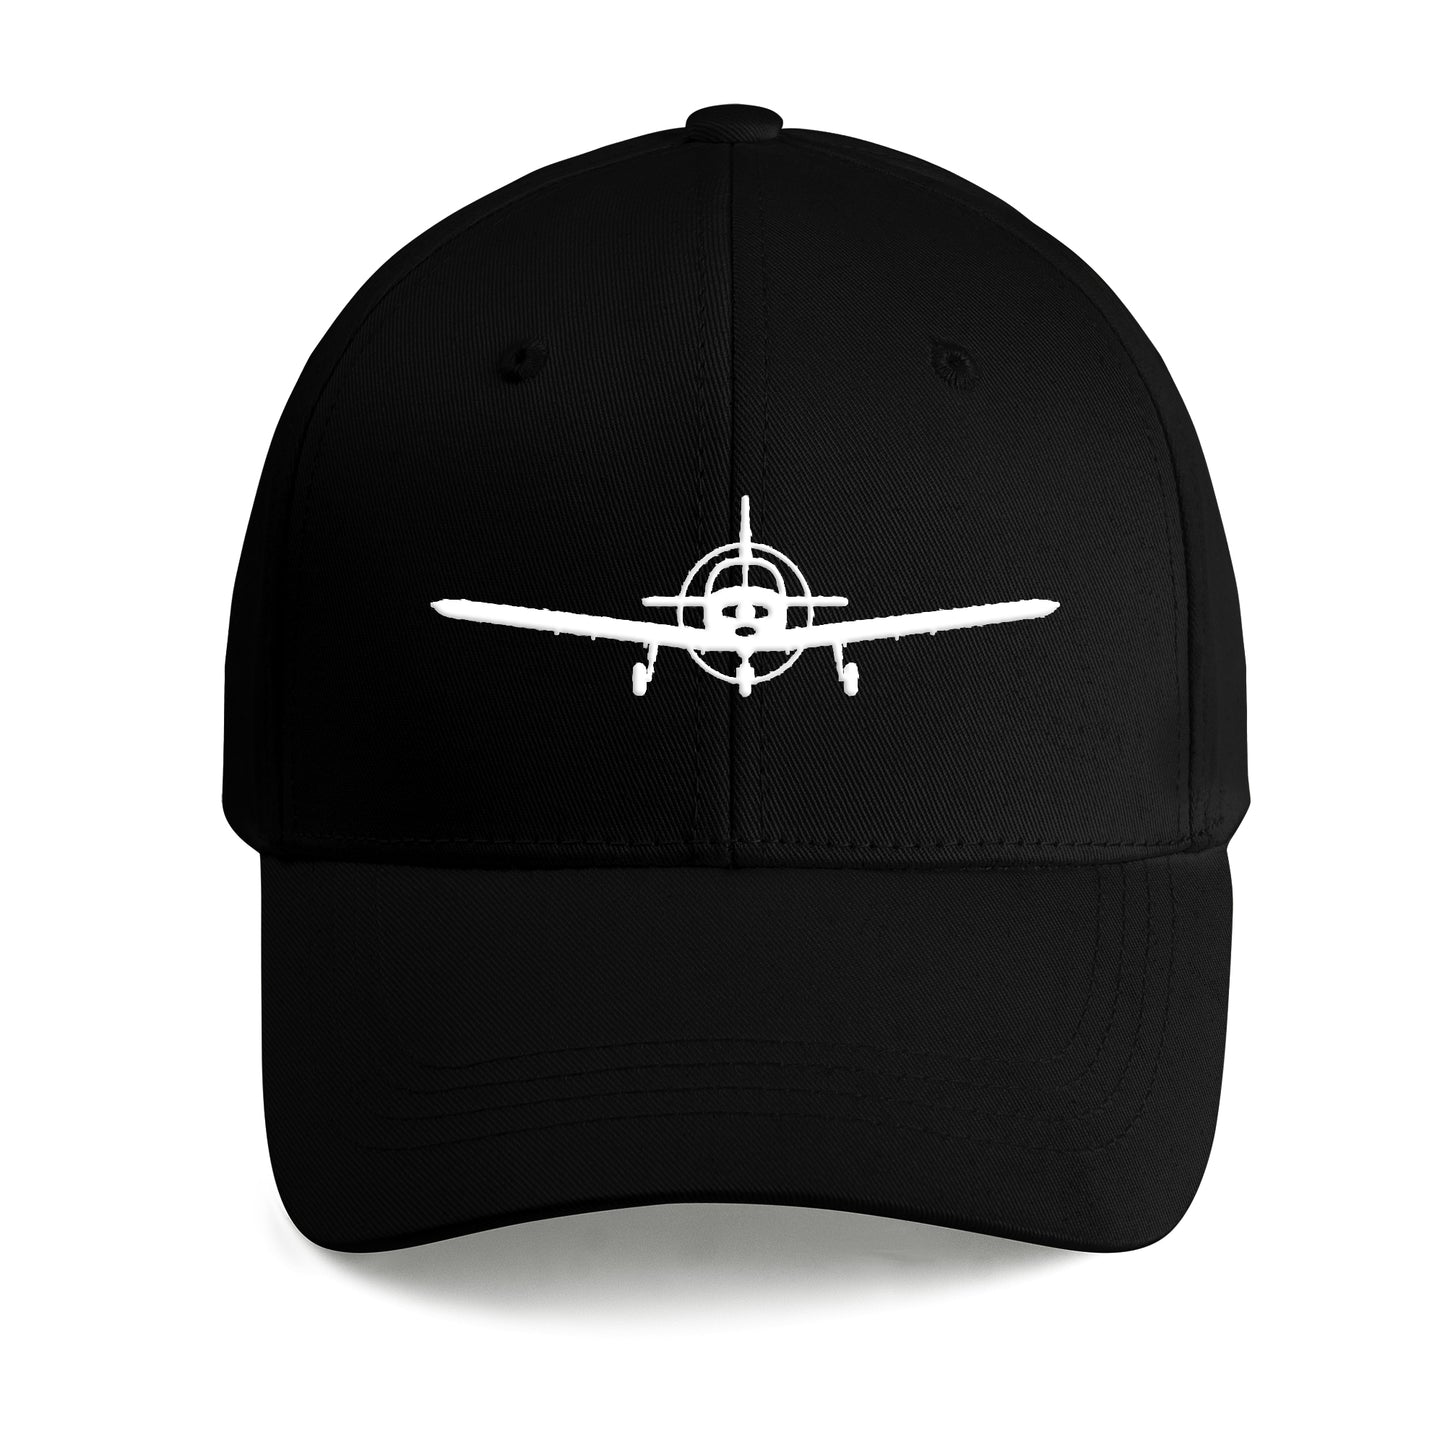 Piper PA-28 Cherokee Embroidered Cap